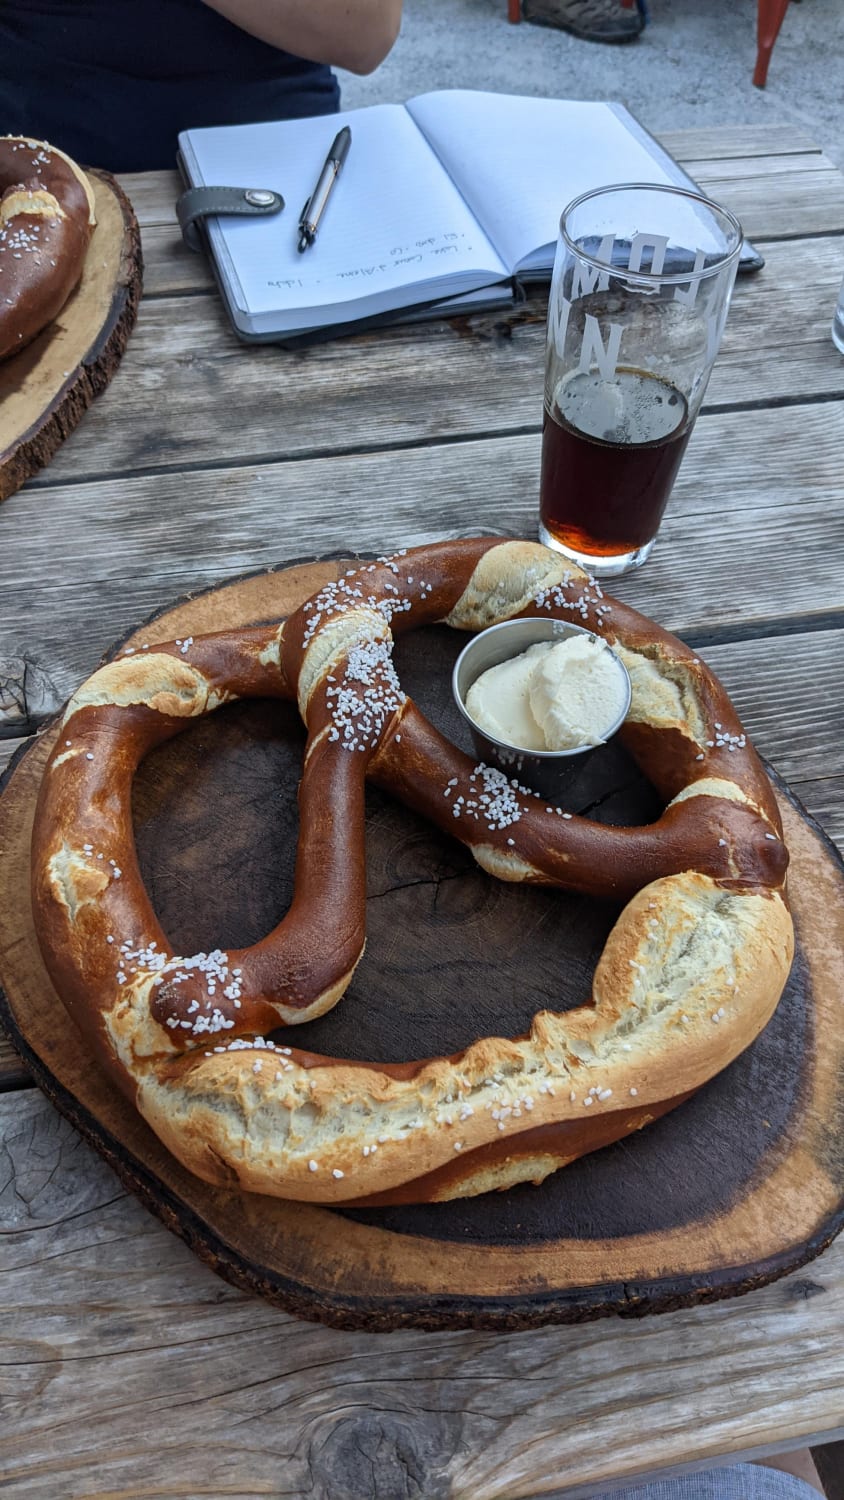 [I ate] giant German pretzel with whipped cheese.